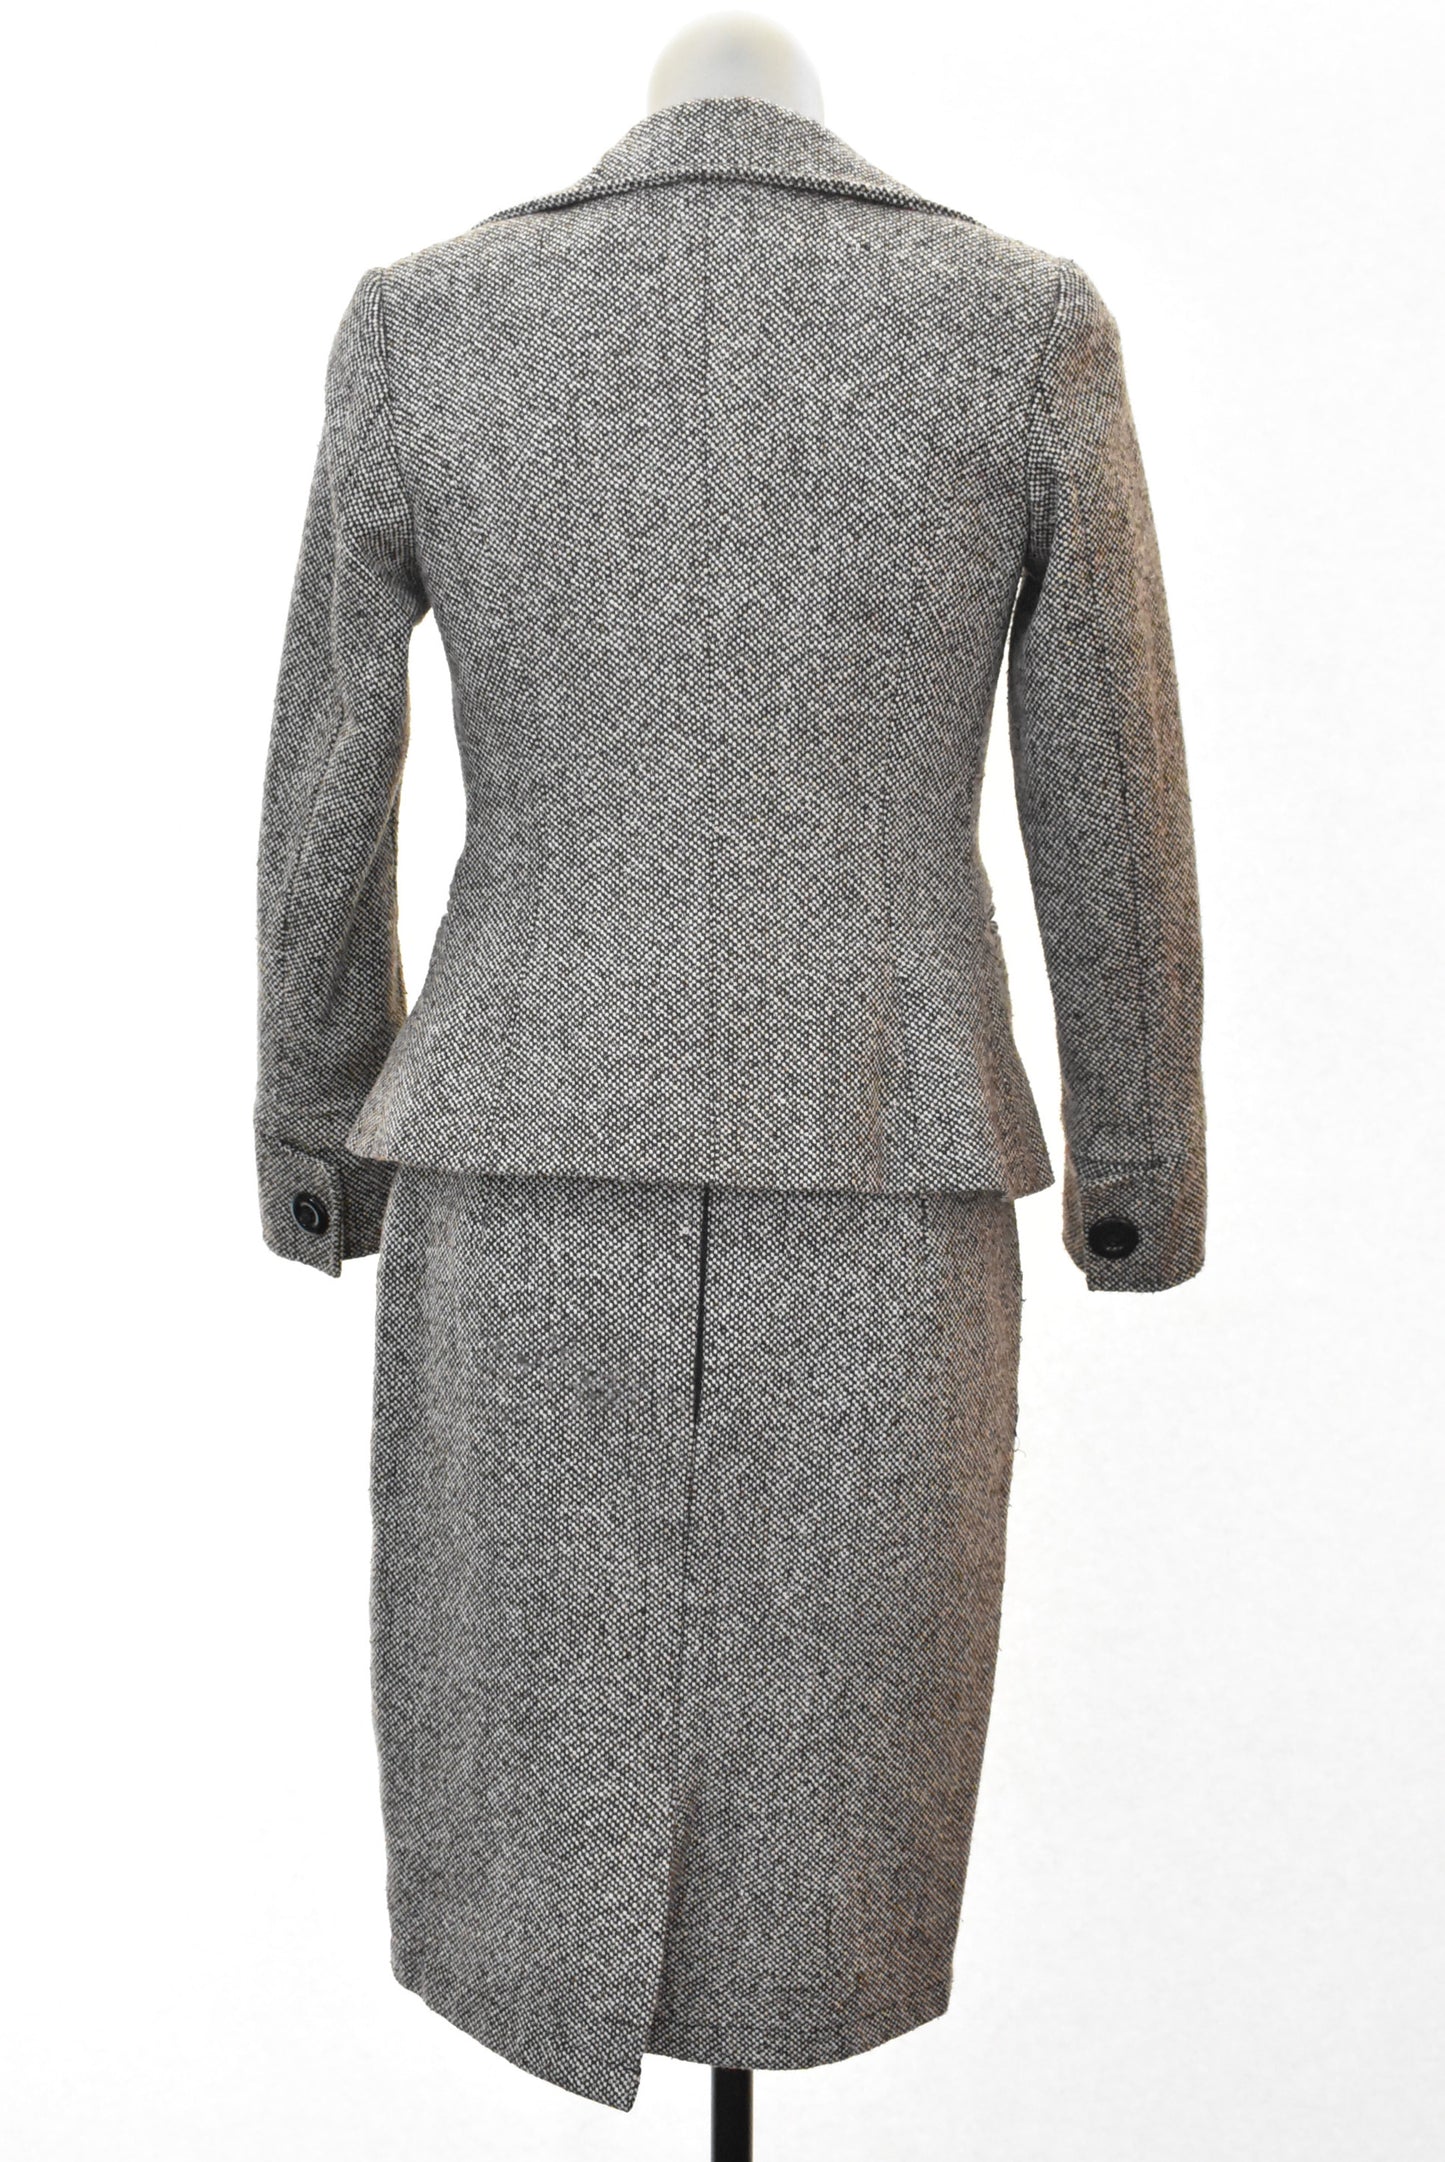 Two piece lined suit (likely wool), S